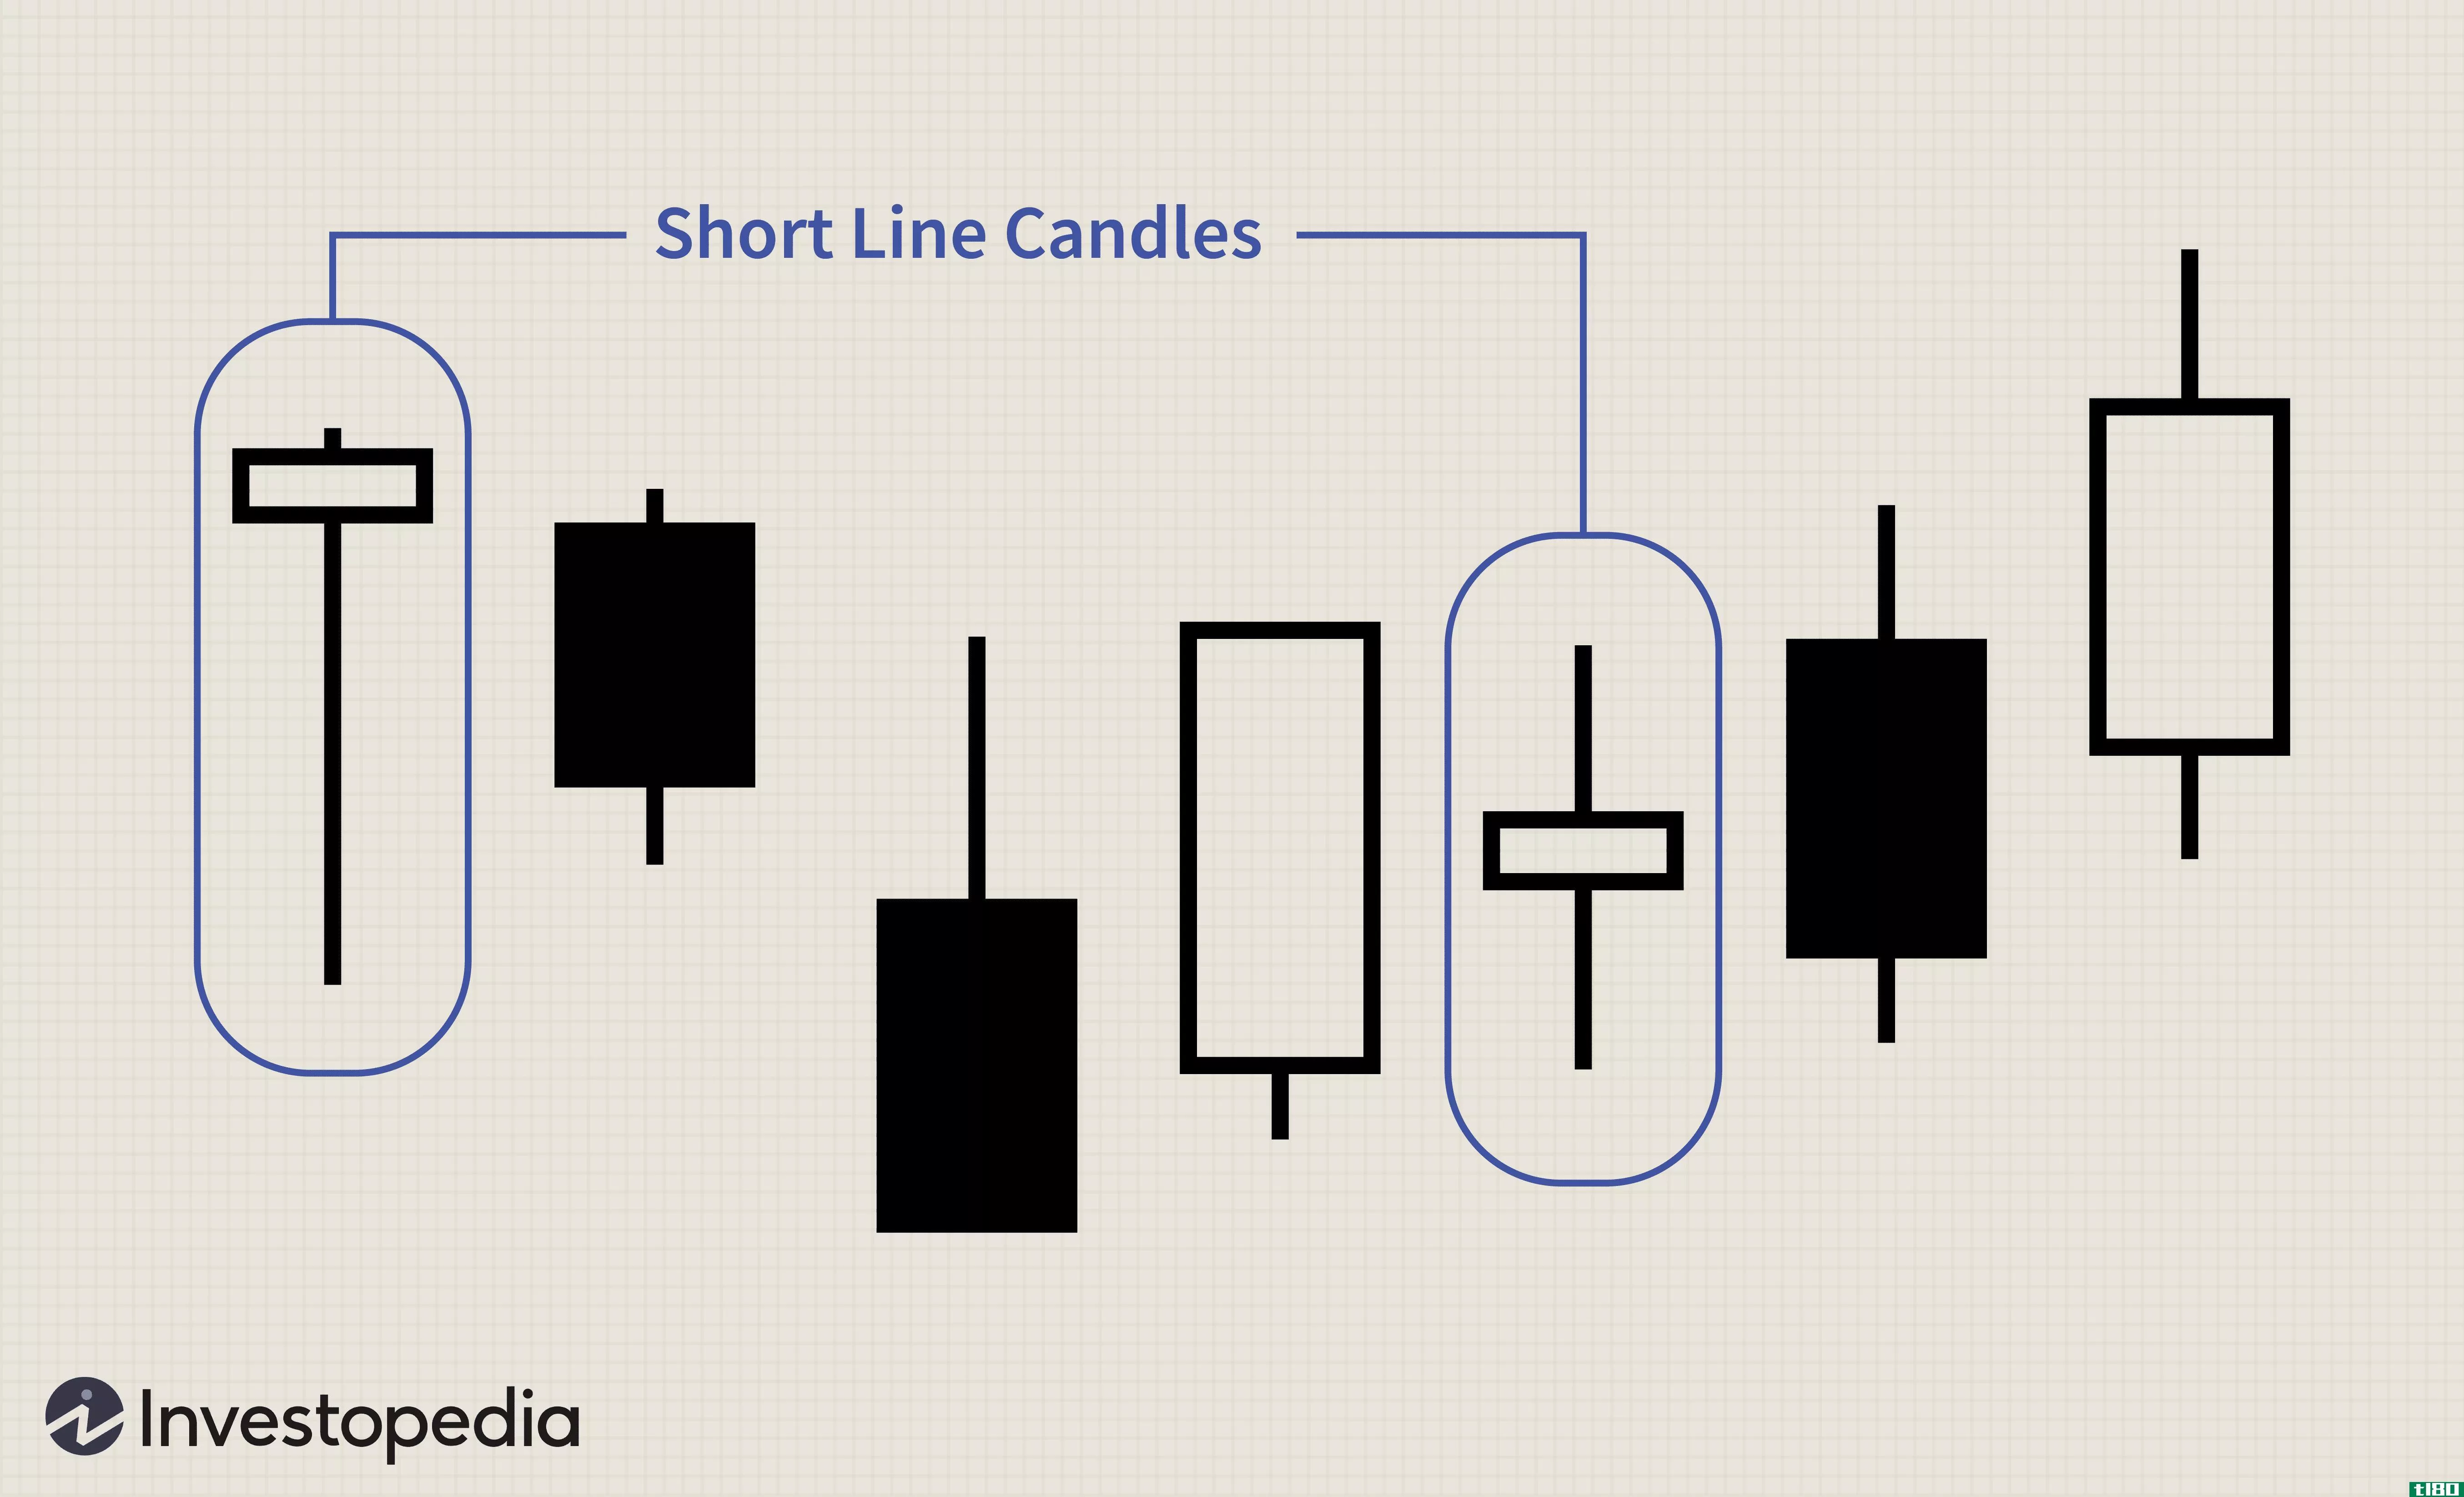 Short Line Candle